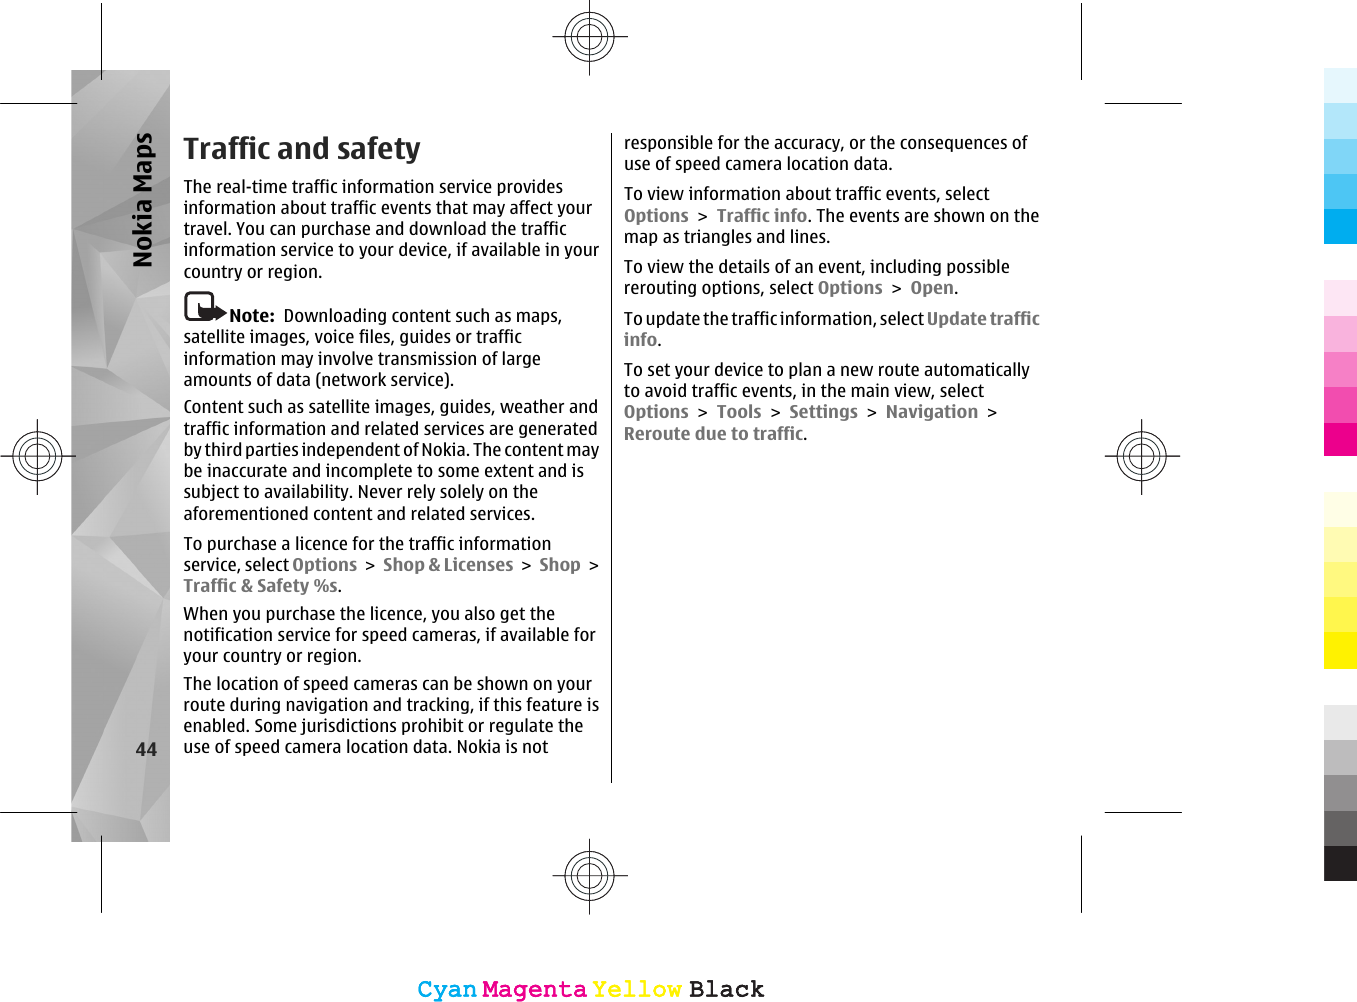 Traffic and safetyThe real-time traffic information service providesinformation about traffic events that may affect yourtravel. You can purchase and download the trafficinformation service to your device, if available in yourcountry or region.Note:  Downloading content such as maps,satellite images, voice files, guides or trafficinformation may involve transmission of largeamounts of data (network service).Content such as satellite images, guides, weather andtraffic information and related services are generatedby third parties independent of Nokia. The content maybe inaccurate and incomplete to some extent and issubject to availability. Never rely solely on theaforementioned content and related services.To purchase a licence for the traffic informationservice, select Options &gt; Shop &amp; Licenses &gt; Shop &gt;Traffic &amp; Safety %s.When you purchase the licence, you also get thenotification service for speed cameras, if available foryour country or region.The location of speed cameras can be shown on yourroute during navigation and tracking, if this feature isenabled. Some jurisdictions prohibit or regulate theuse of speed camera location data. Nokia is notresponsible for the accuracy, or the consequences ofuse of speed camera location data.To view information about traffic events, selectOptions &gt; Traffic info. The events are shown on themap as triangles and lines.To view the details of an event, including possiblererouting options, select Options &gt; Open.To update the traffic information, select Update trafficinfo.To set your device to plan a new route automaticallyto avoid traffic events, in the main view, selectOptions &gt; Tools &gt; Settings &gt; Navigation &gt;Reroute due to traffic.44Nokia MapsCyanCyanMagentaMagentaYellowYellowBlackBlackCyanCyanMagentaMagentaYellowYellowBlackBlack